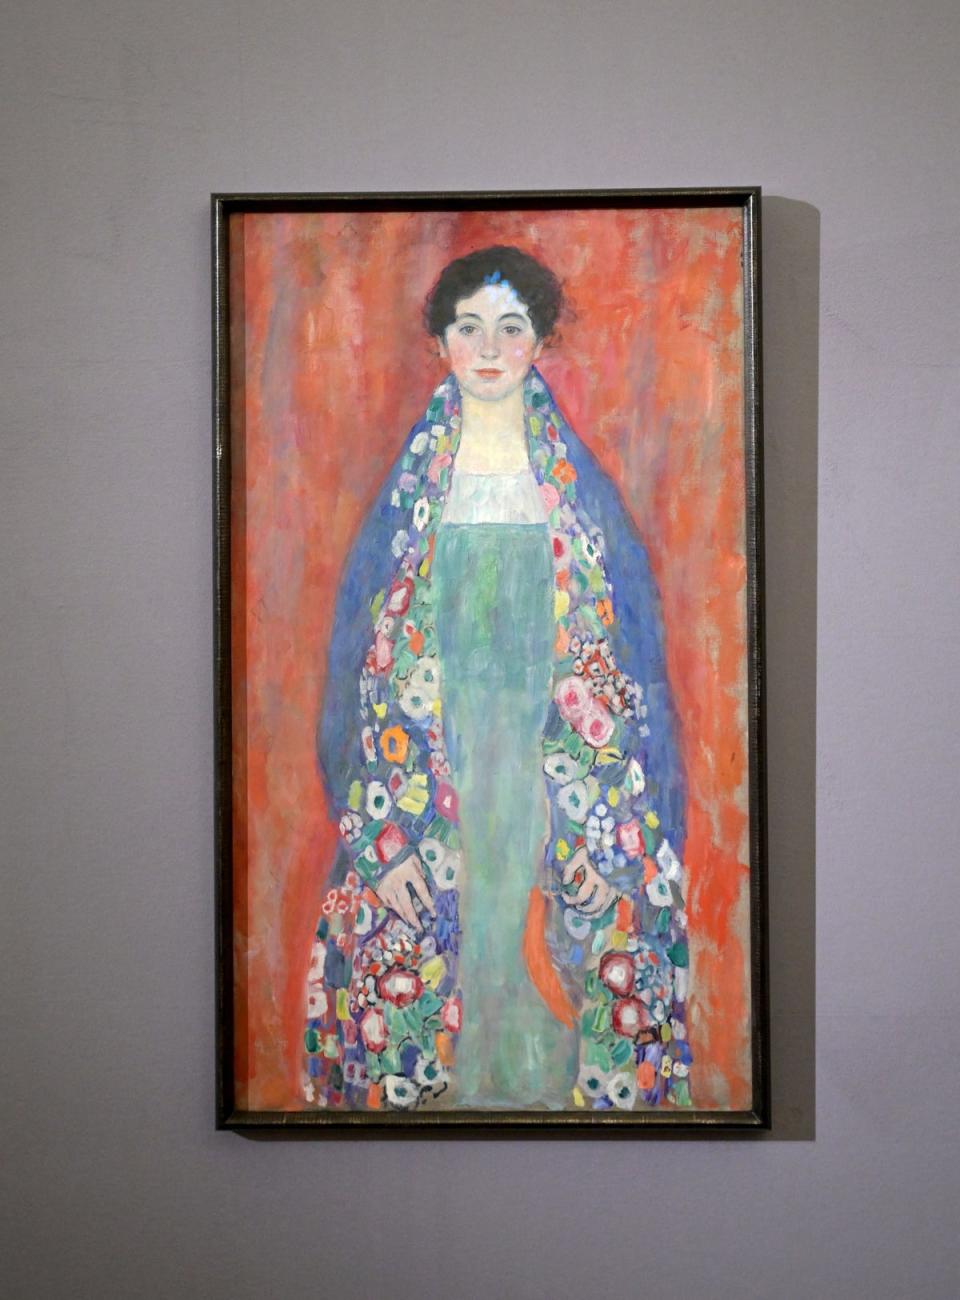 “Portrait of Fraulein Lieser” has been valued at more than £42 million (APA/AFP via Getty Images)